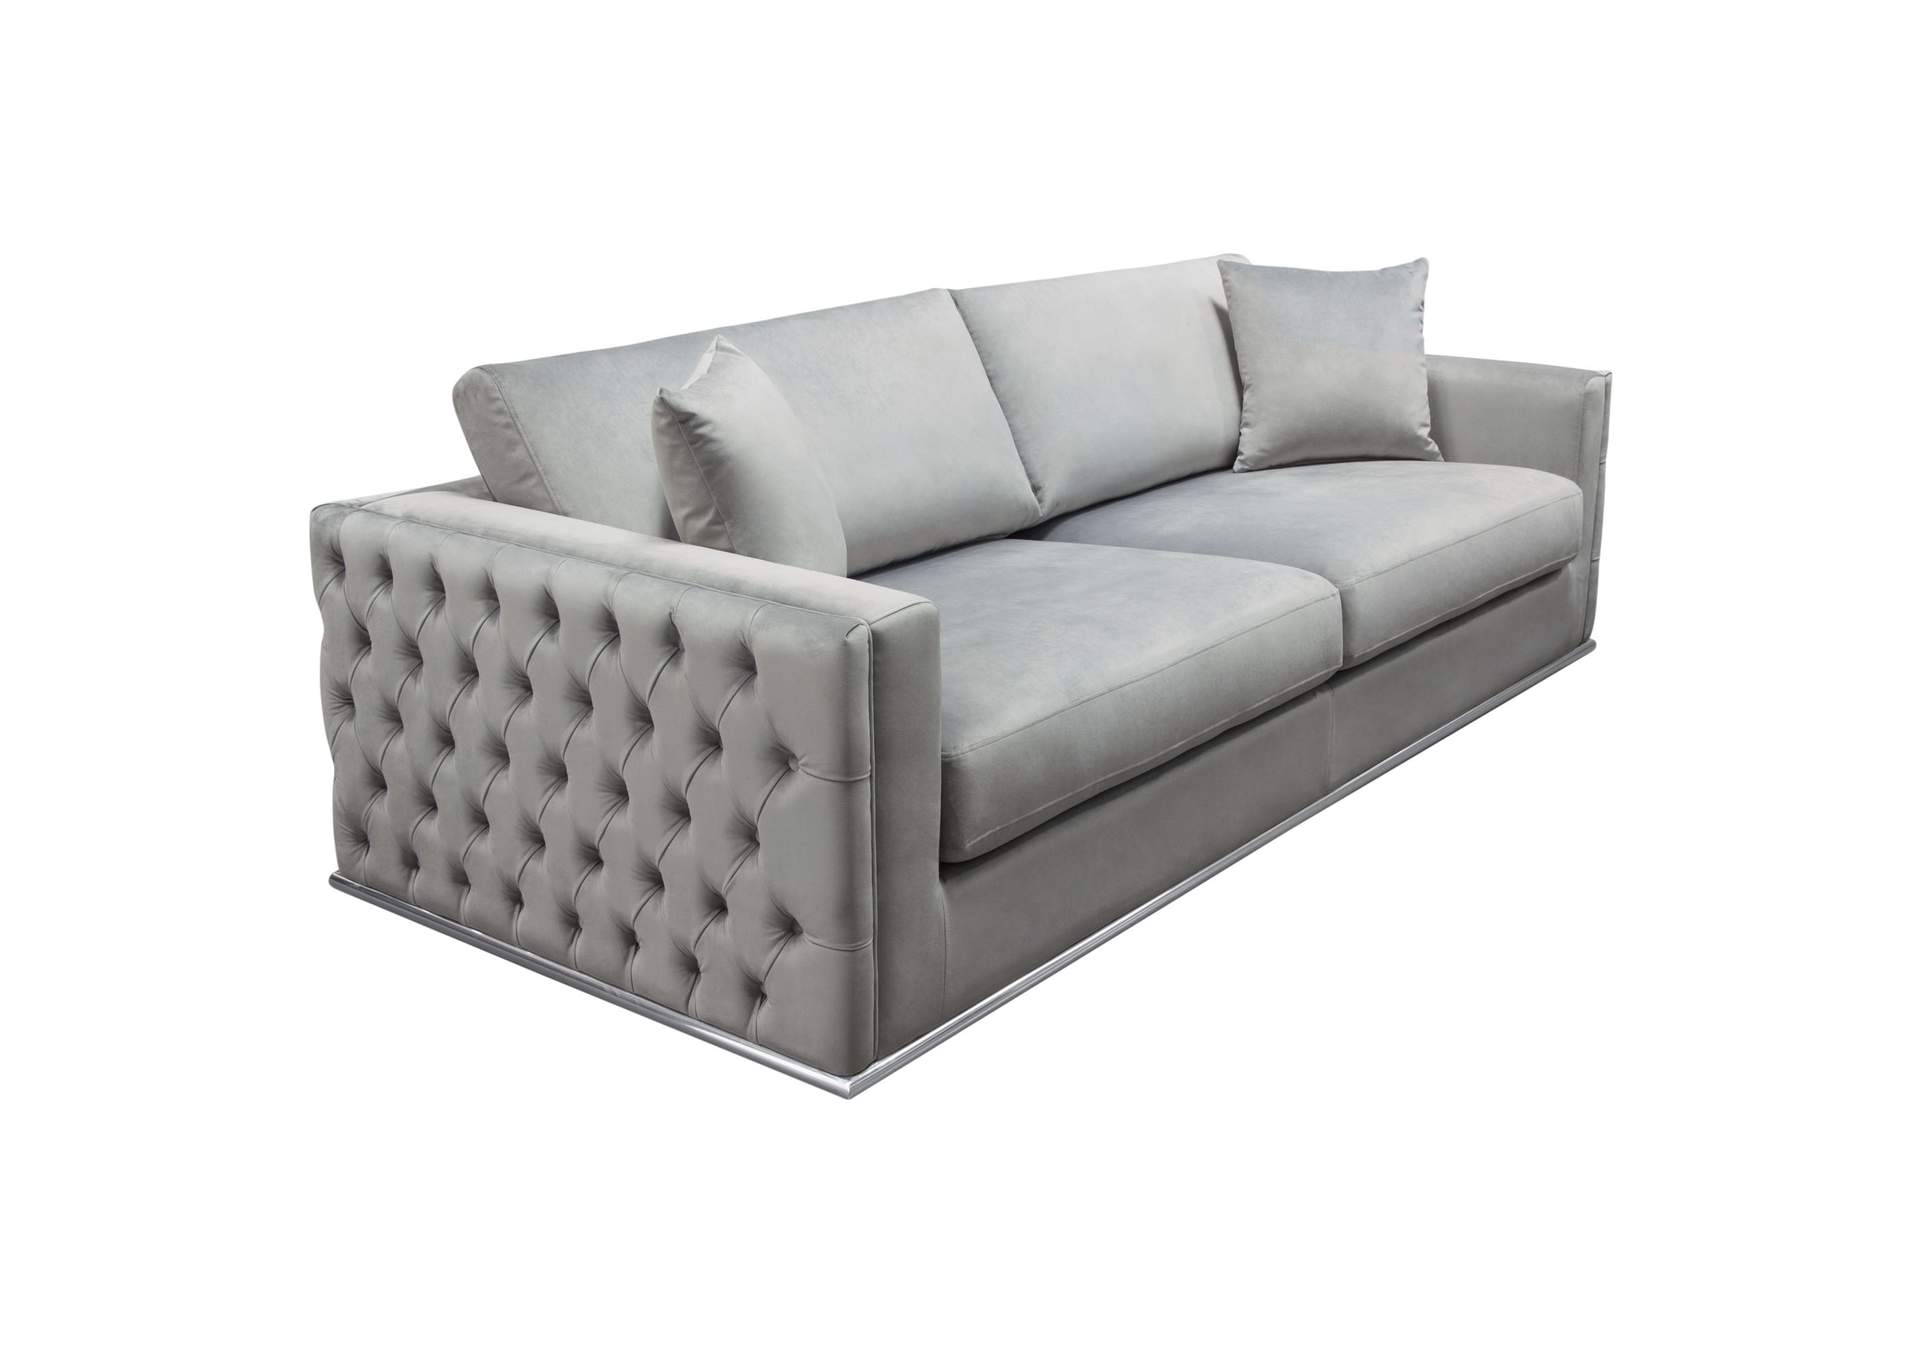 Envy Sofa in Platinum Grey Velvet with Tufted Outside Detail and Silver Metal Trim by Diamond Sofa,Diamond Sofa